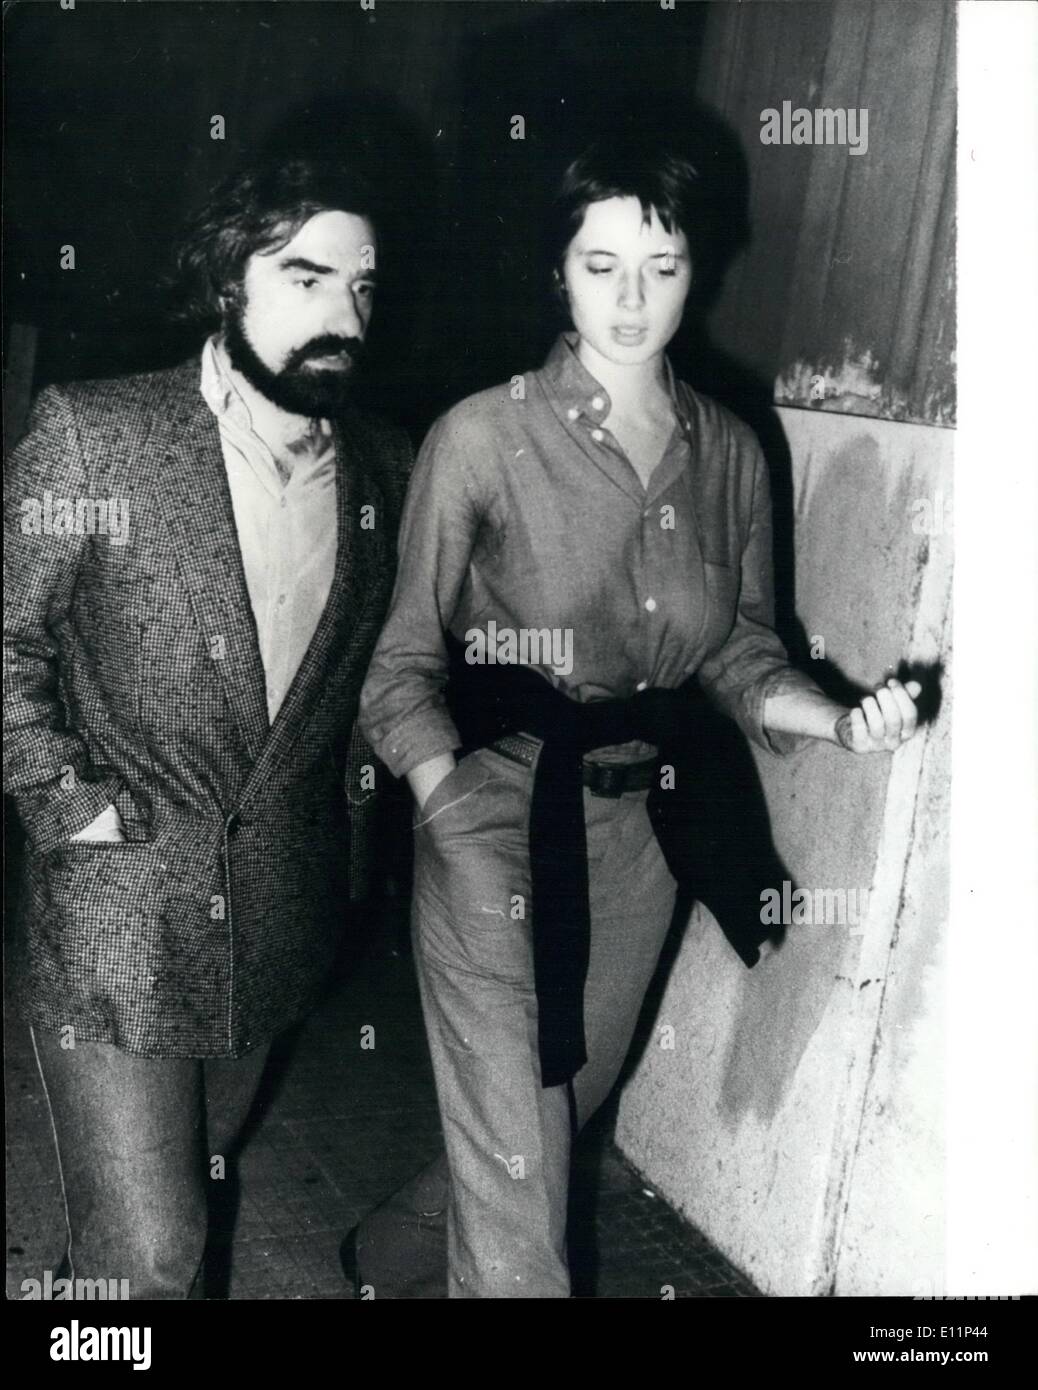 May 05, 1979 - Ingrid Bergman's daughter to wed: Isabella Rossellini, daughter of the actress Ingrid Bergman and the late Roberto Rossellini, the Italian film director is to marry the American film director Martin Scorsese. Photo shows Isabella Rossellini and Martin Scorsese seen together in Rome recently. Stock Photo